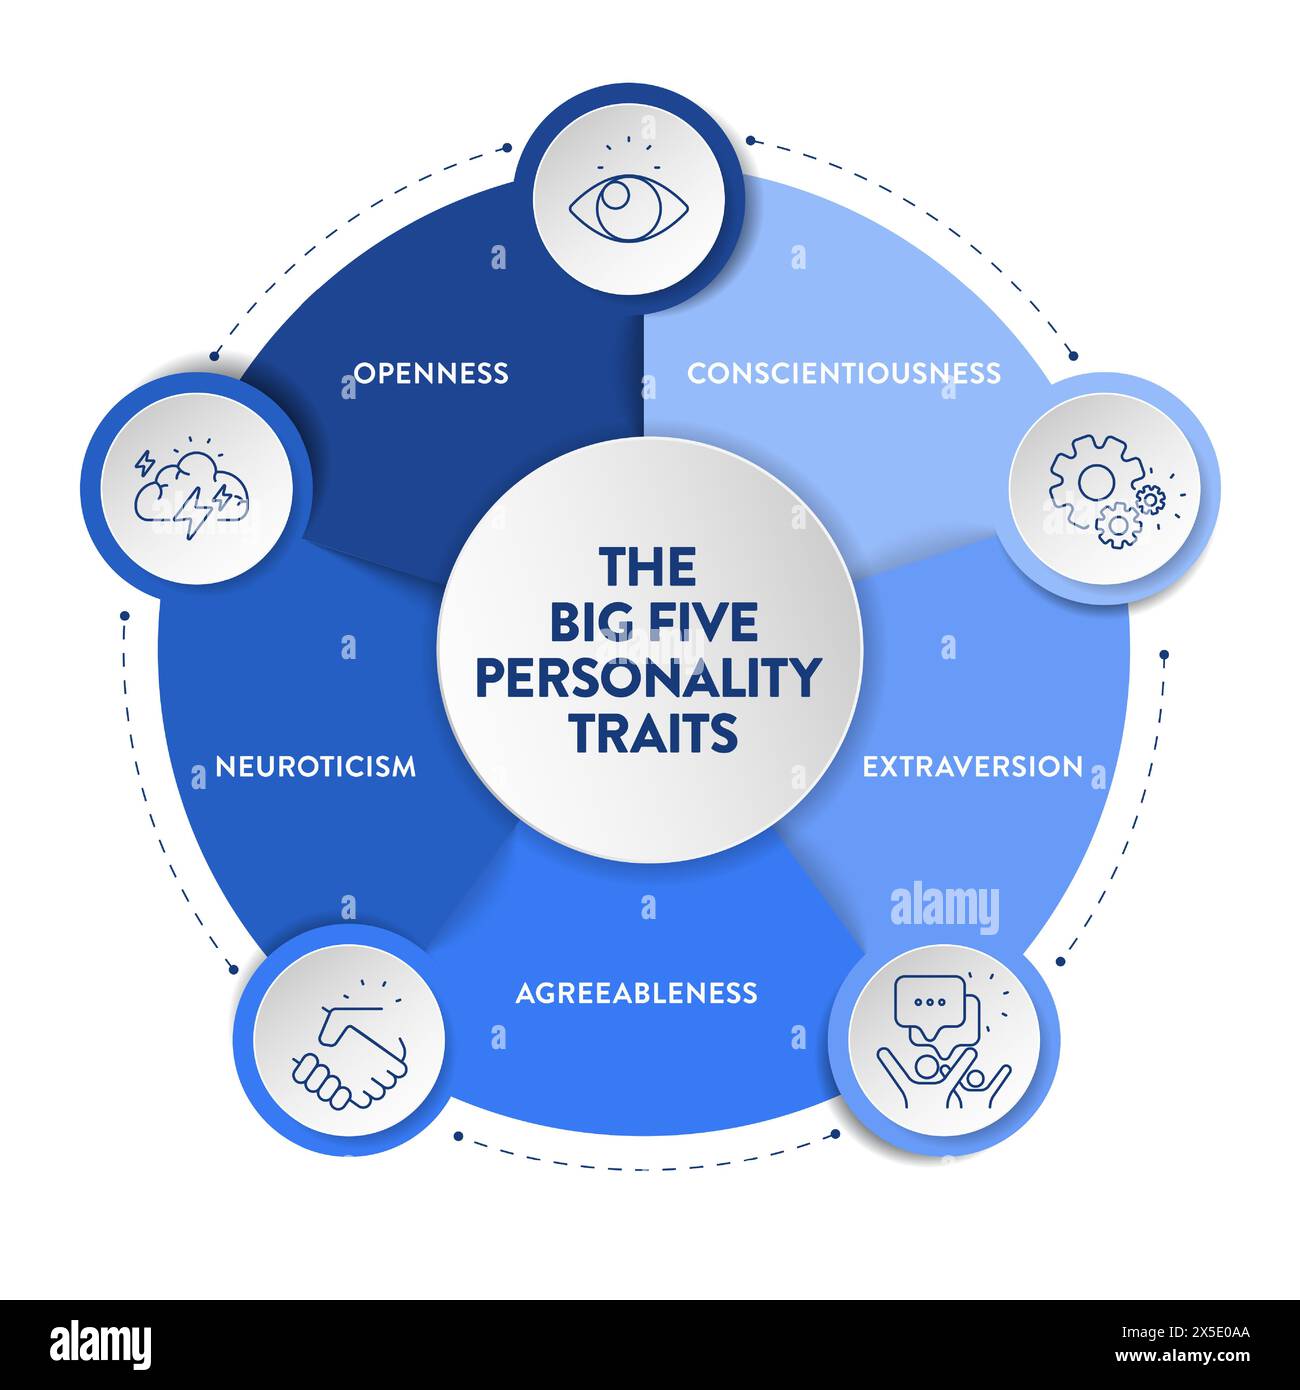 Big Five Personality Traits or OCEAN infographic has 4 types of personality, Agreeableness, Openness to Experience, Neuroticism, Conscientiousness and Stock Vector